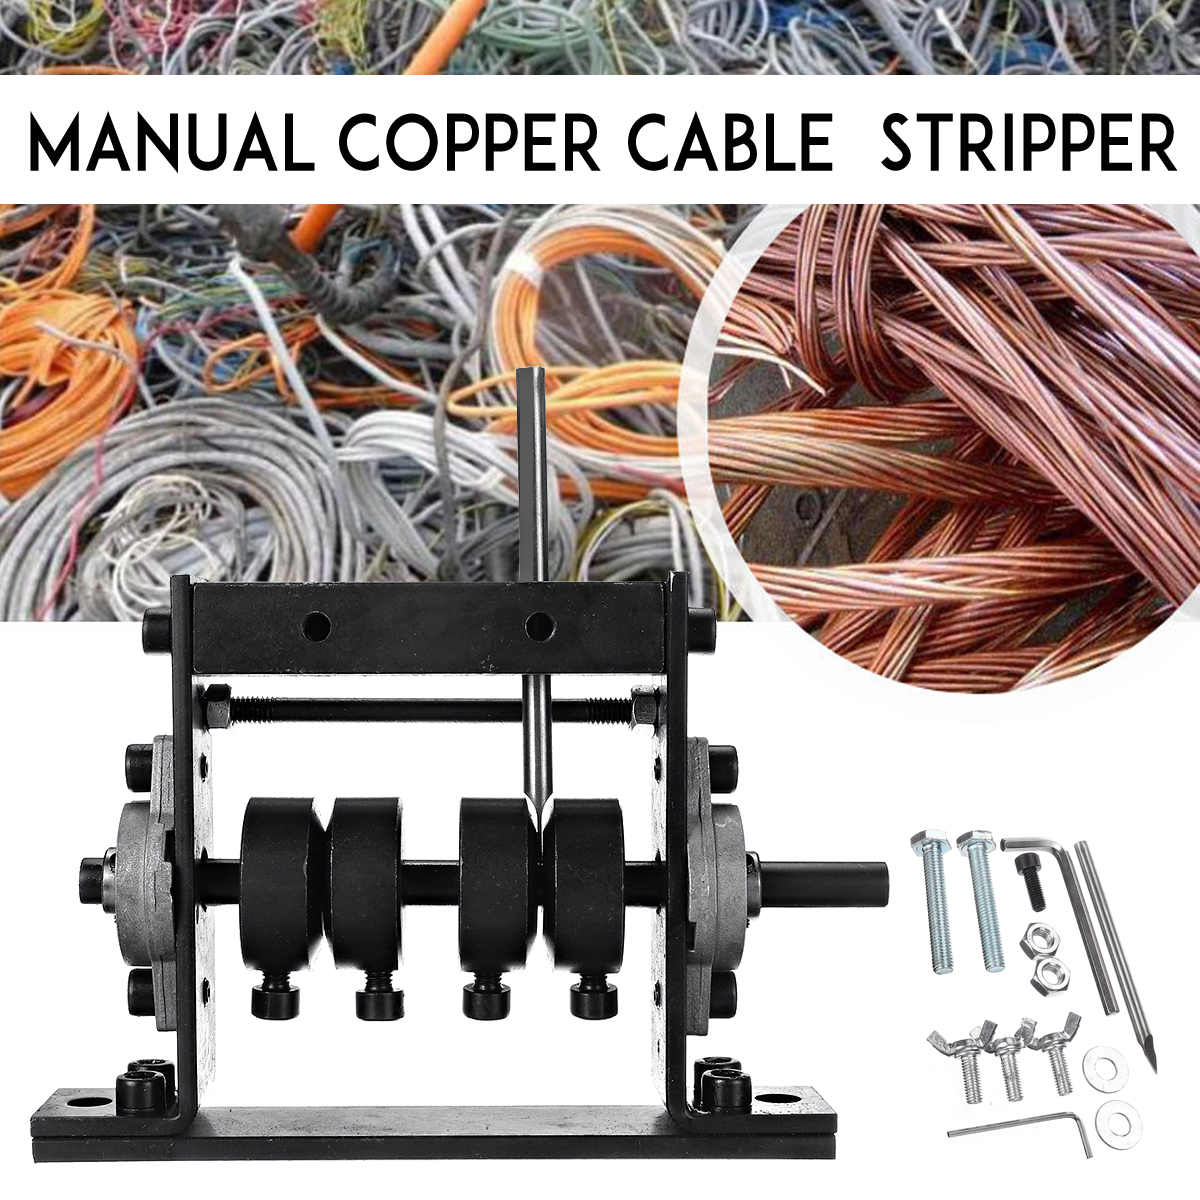 1-30mm-Scrap-Cable-Peeling-Strippers-Fixture-Manual-Copper-Wire-Stripping-Machine-1610884-1